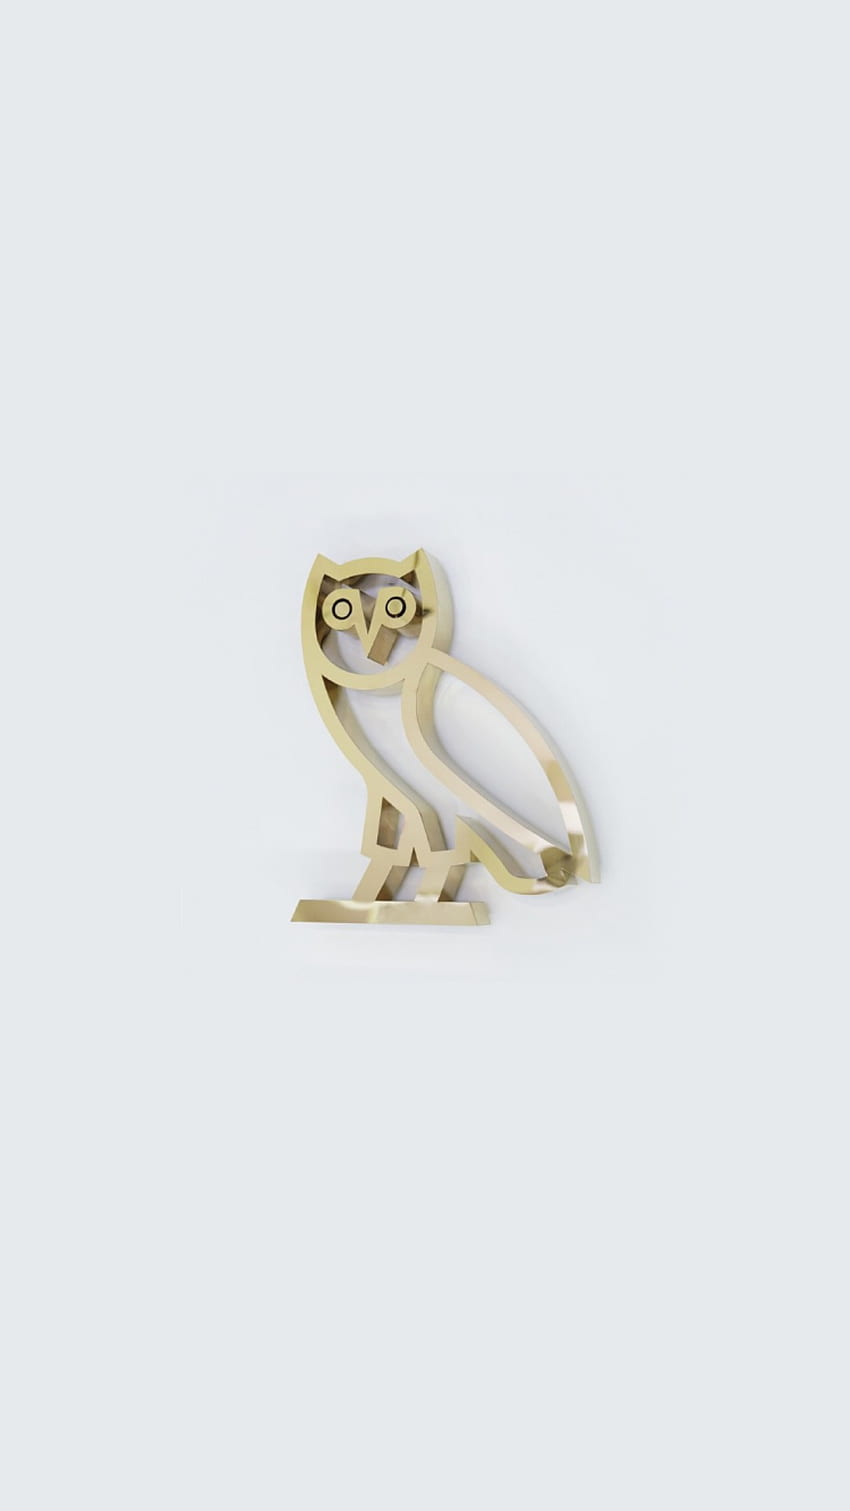 Ovo Owl Drake Wallpaper  Download to your mobile from PHONEKY